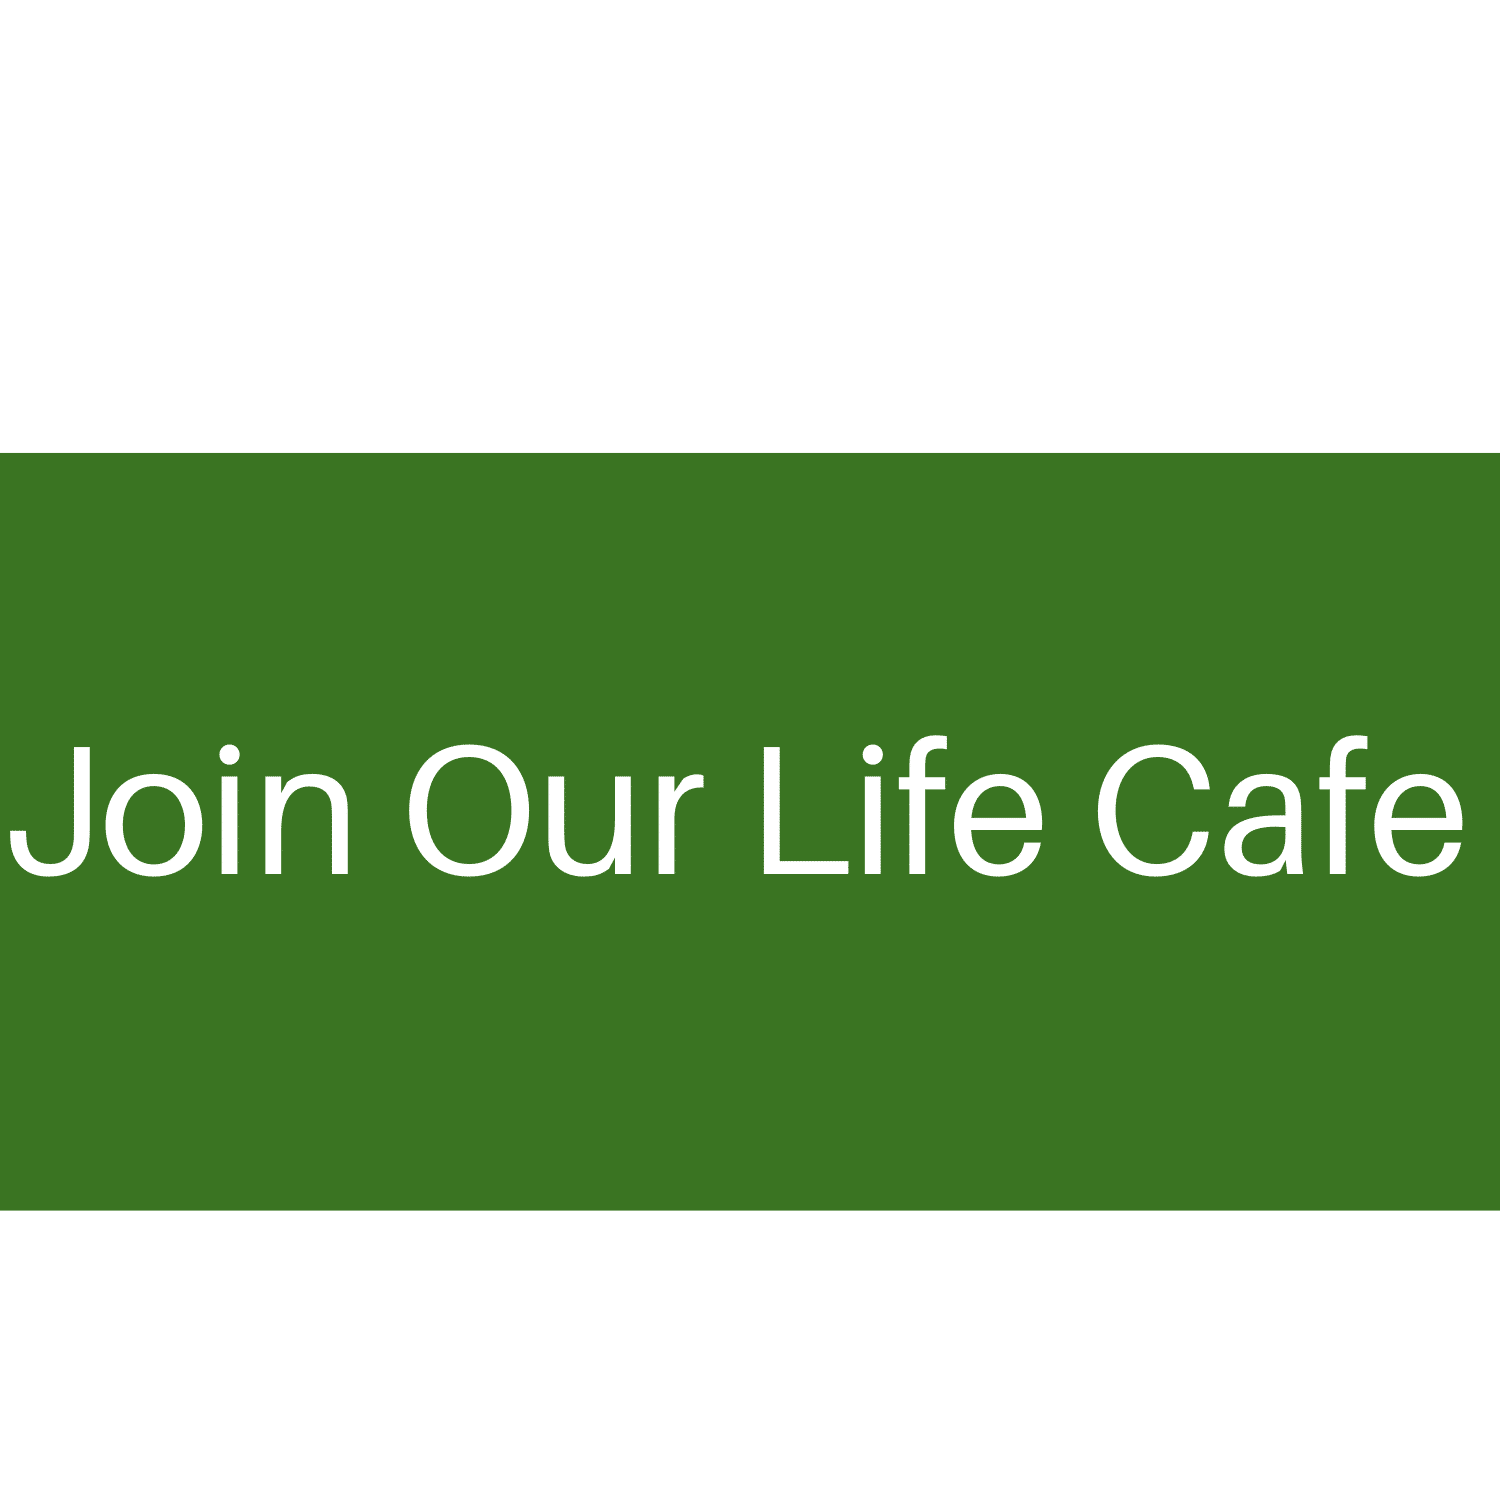 Join Our Life Cafe